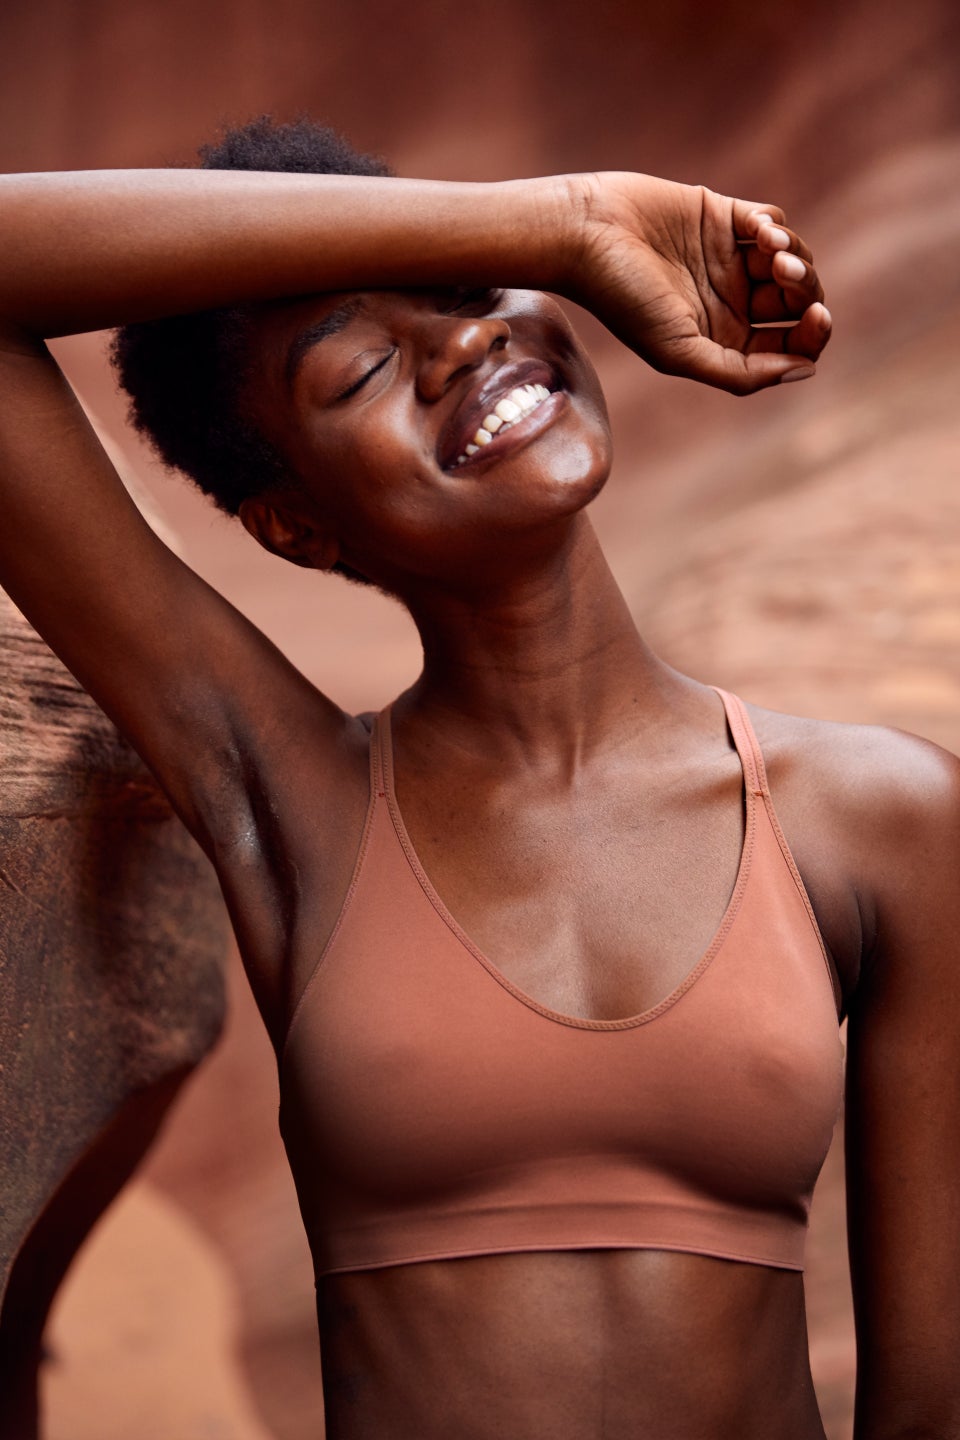 Aerie Launches Nude Lingerie Collection For A Range Of Skin Tones